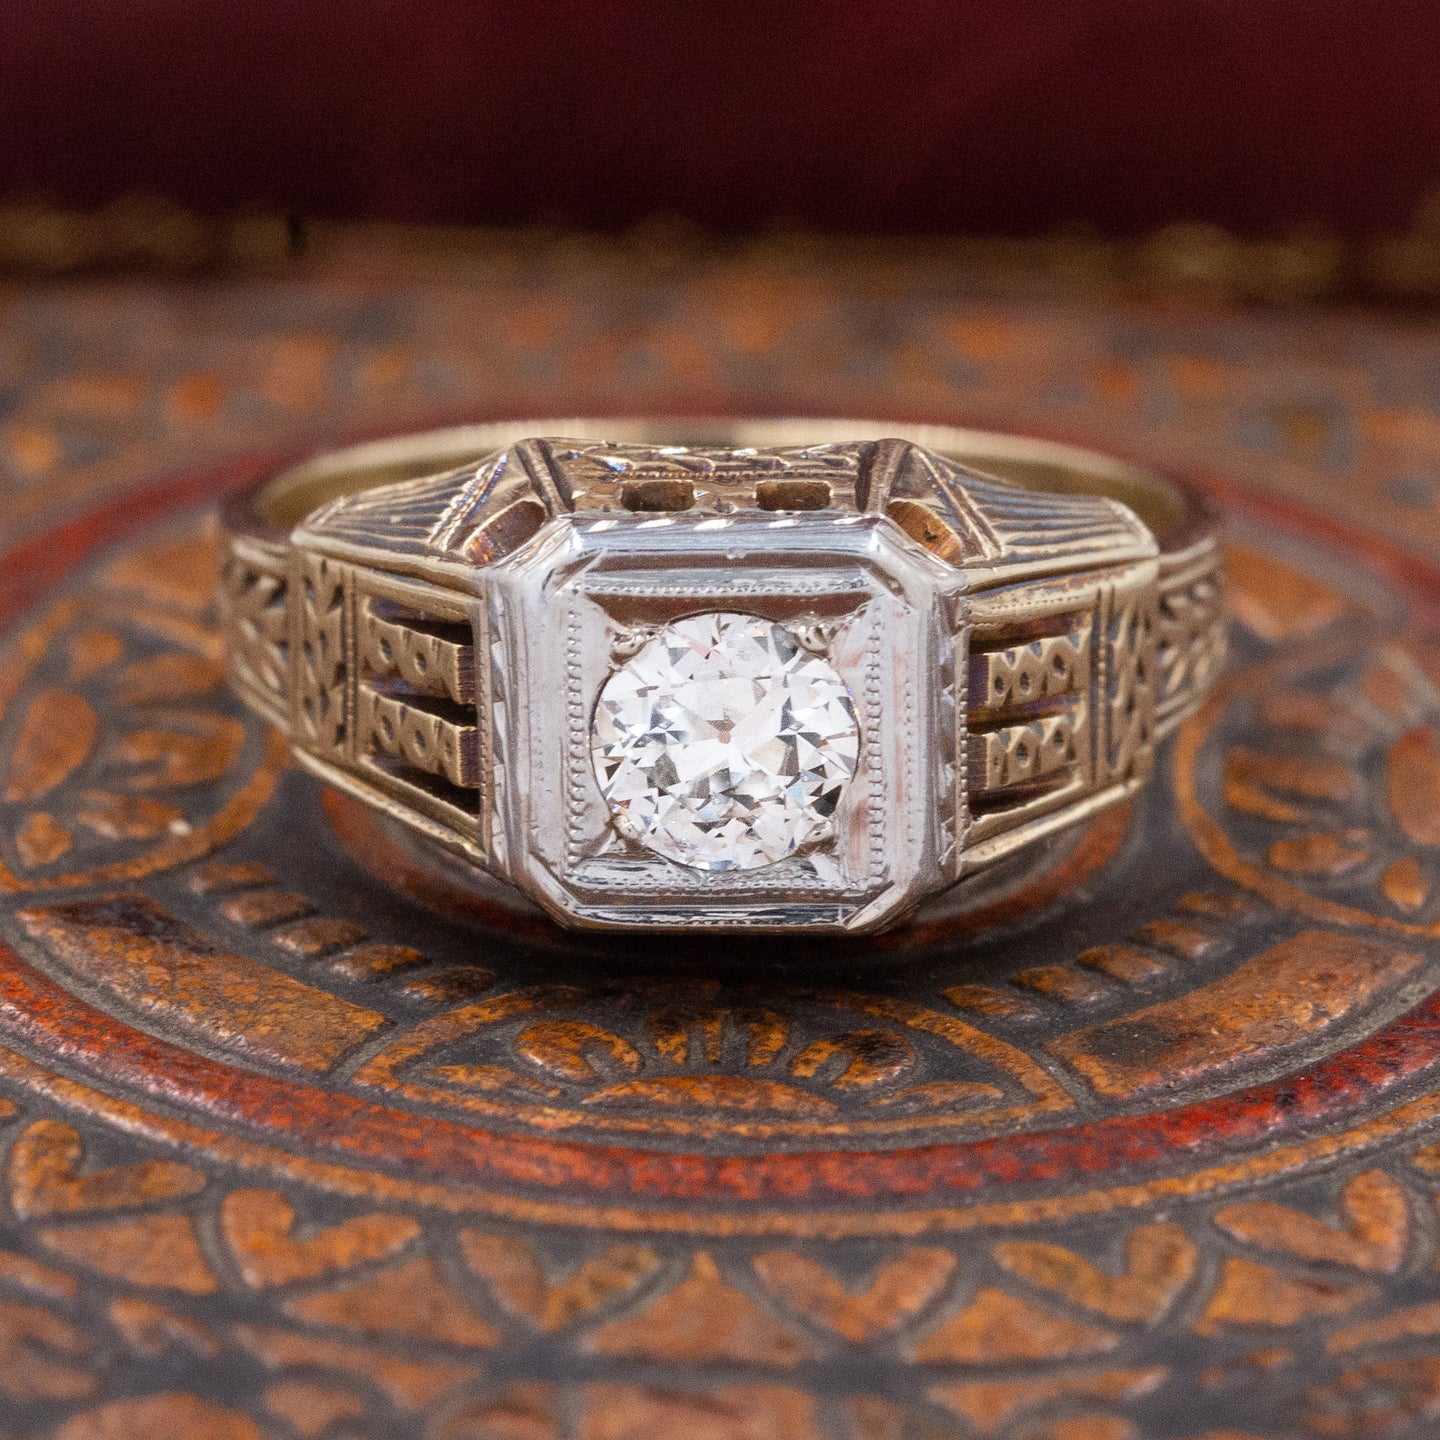 Handcarved Two-Tone Diamond Ring c. 1920s